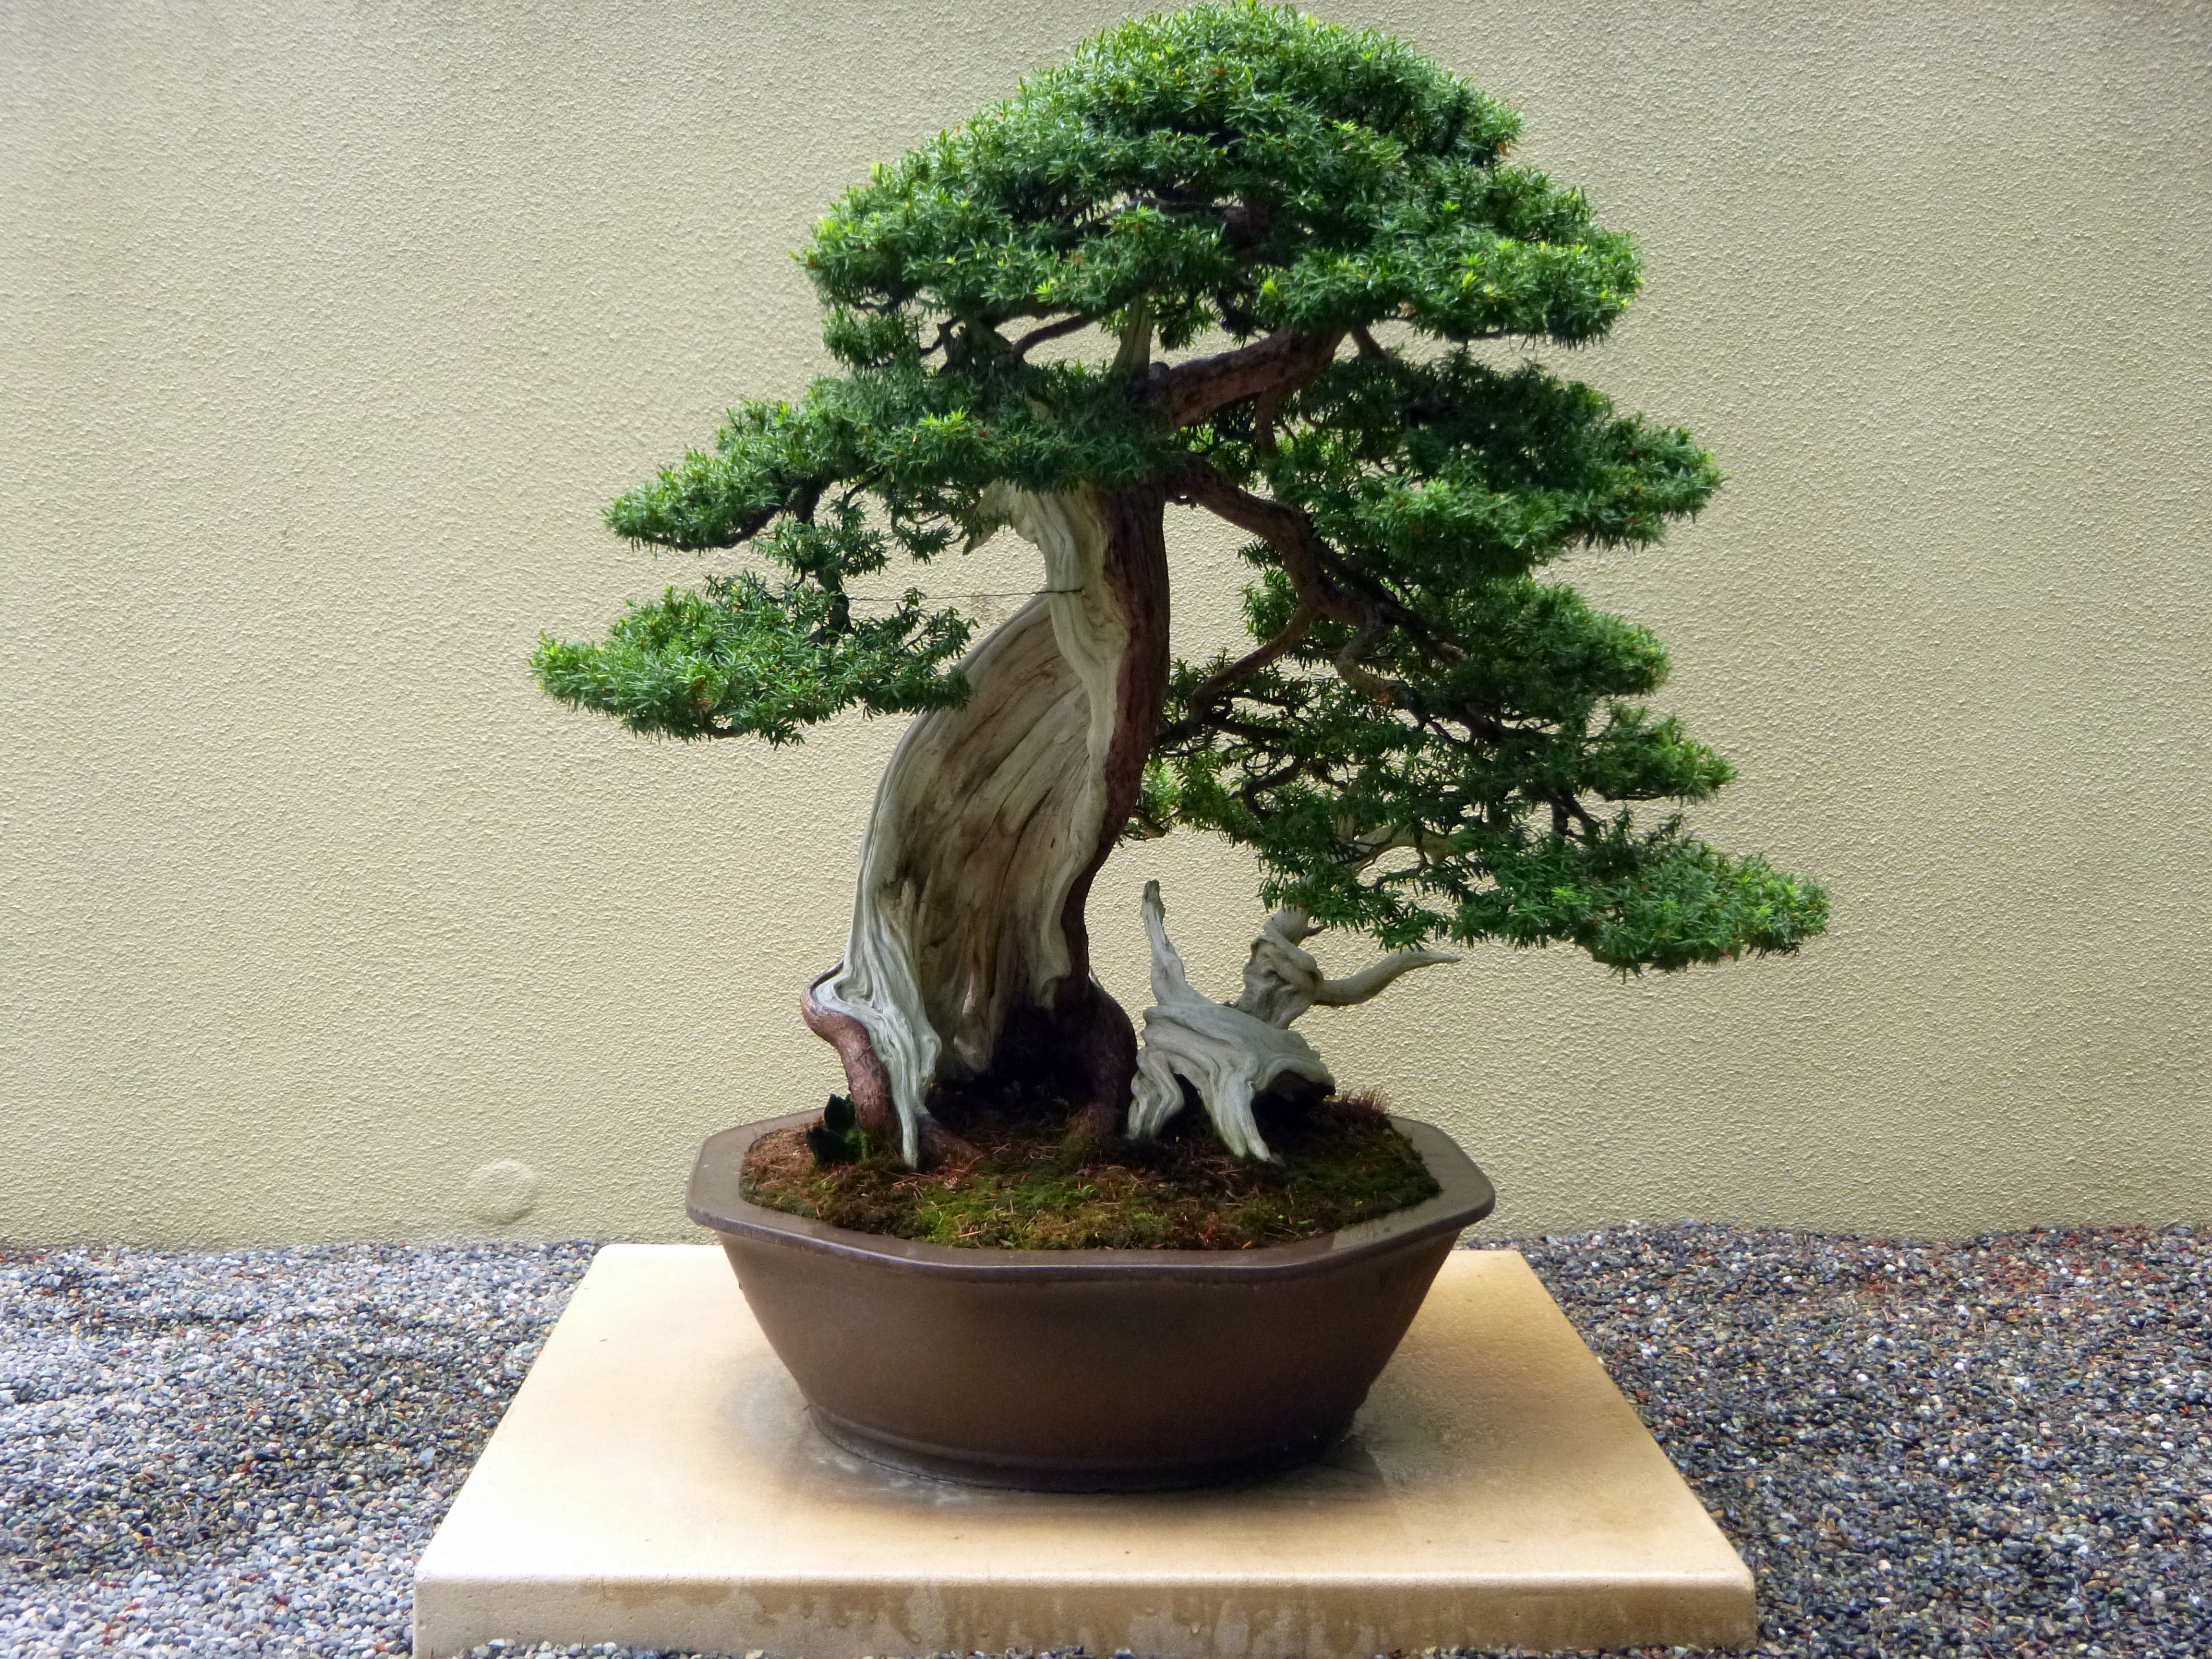 Bonsai Trees - In-Depth Introduction